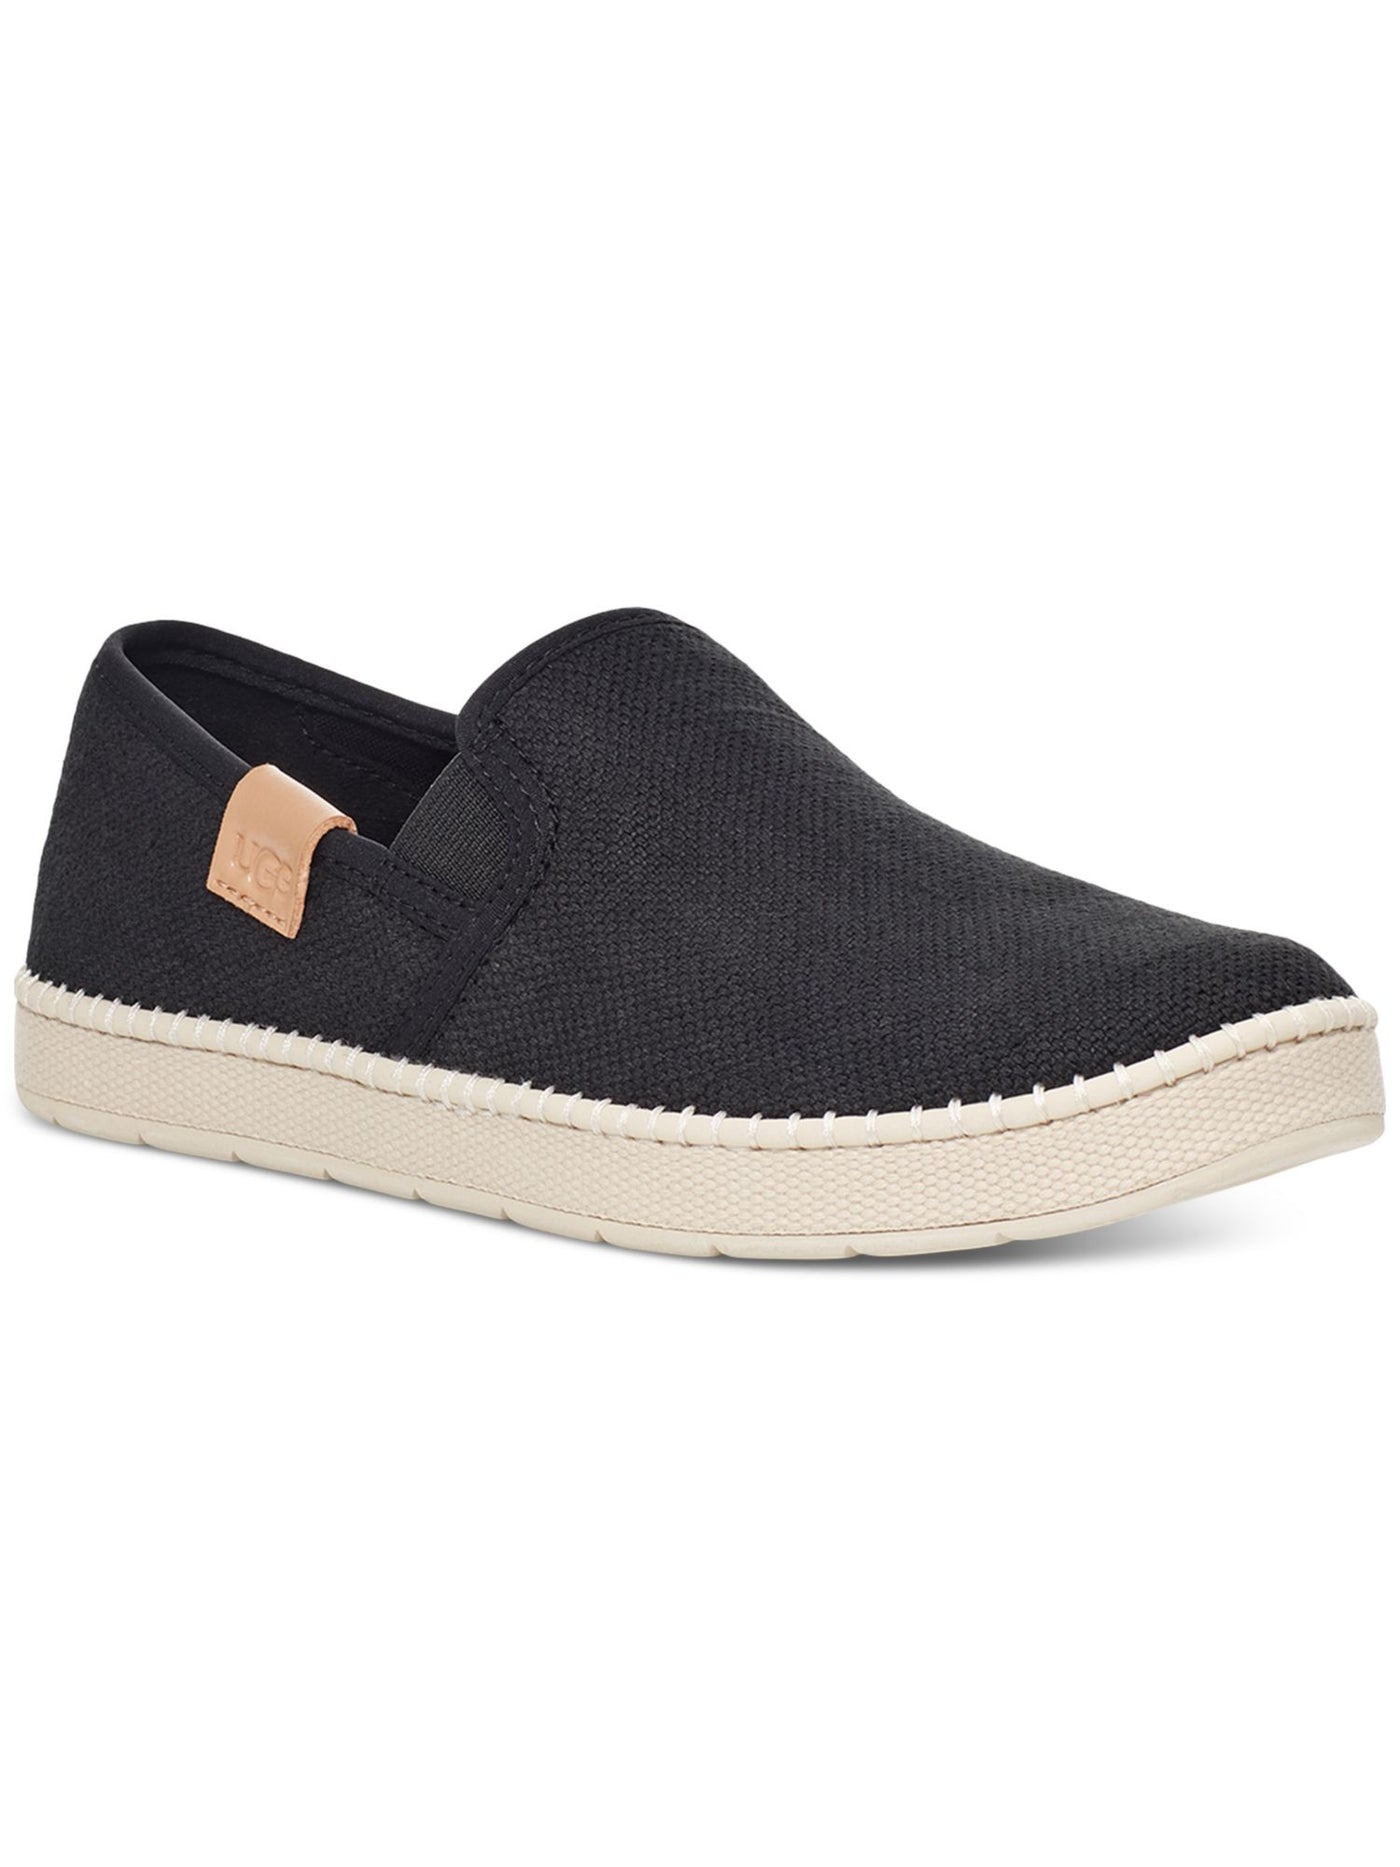 UGG Womens Black Goring Removable Insole Cushioned Luciah Round Toe Platform Slip On Sneakers 9.5